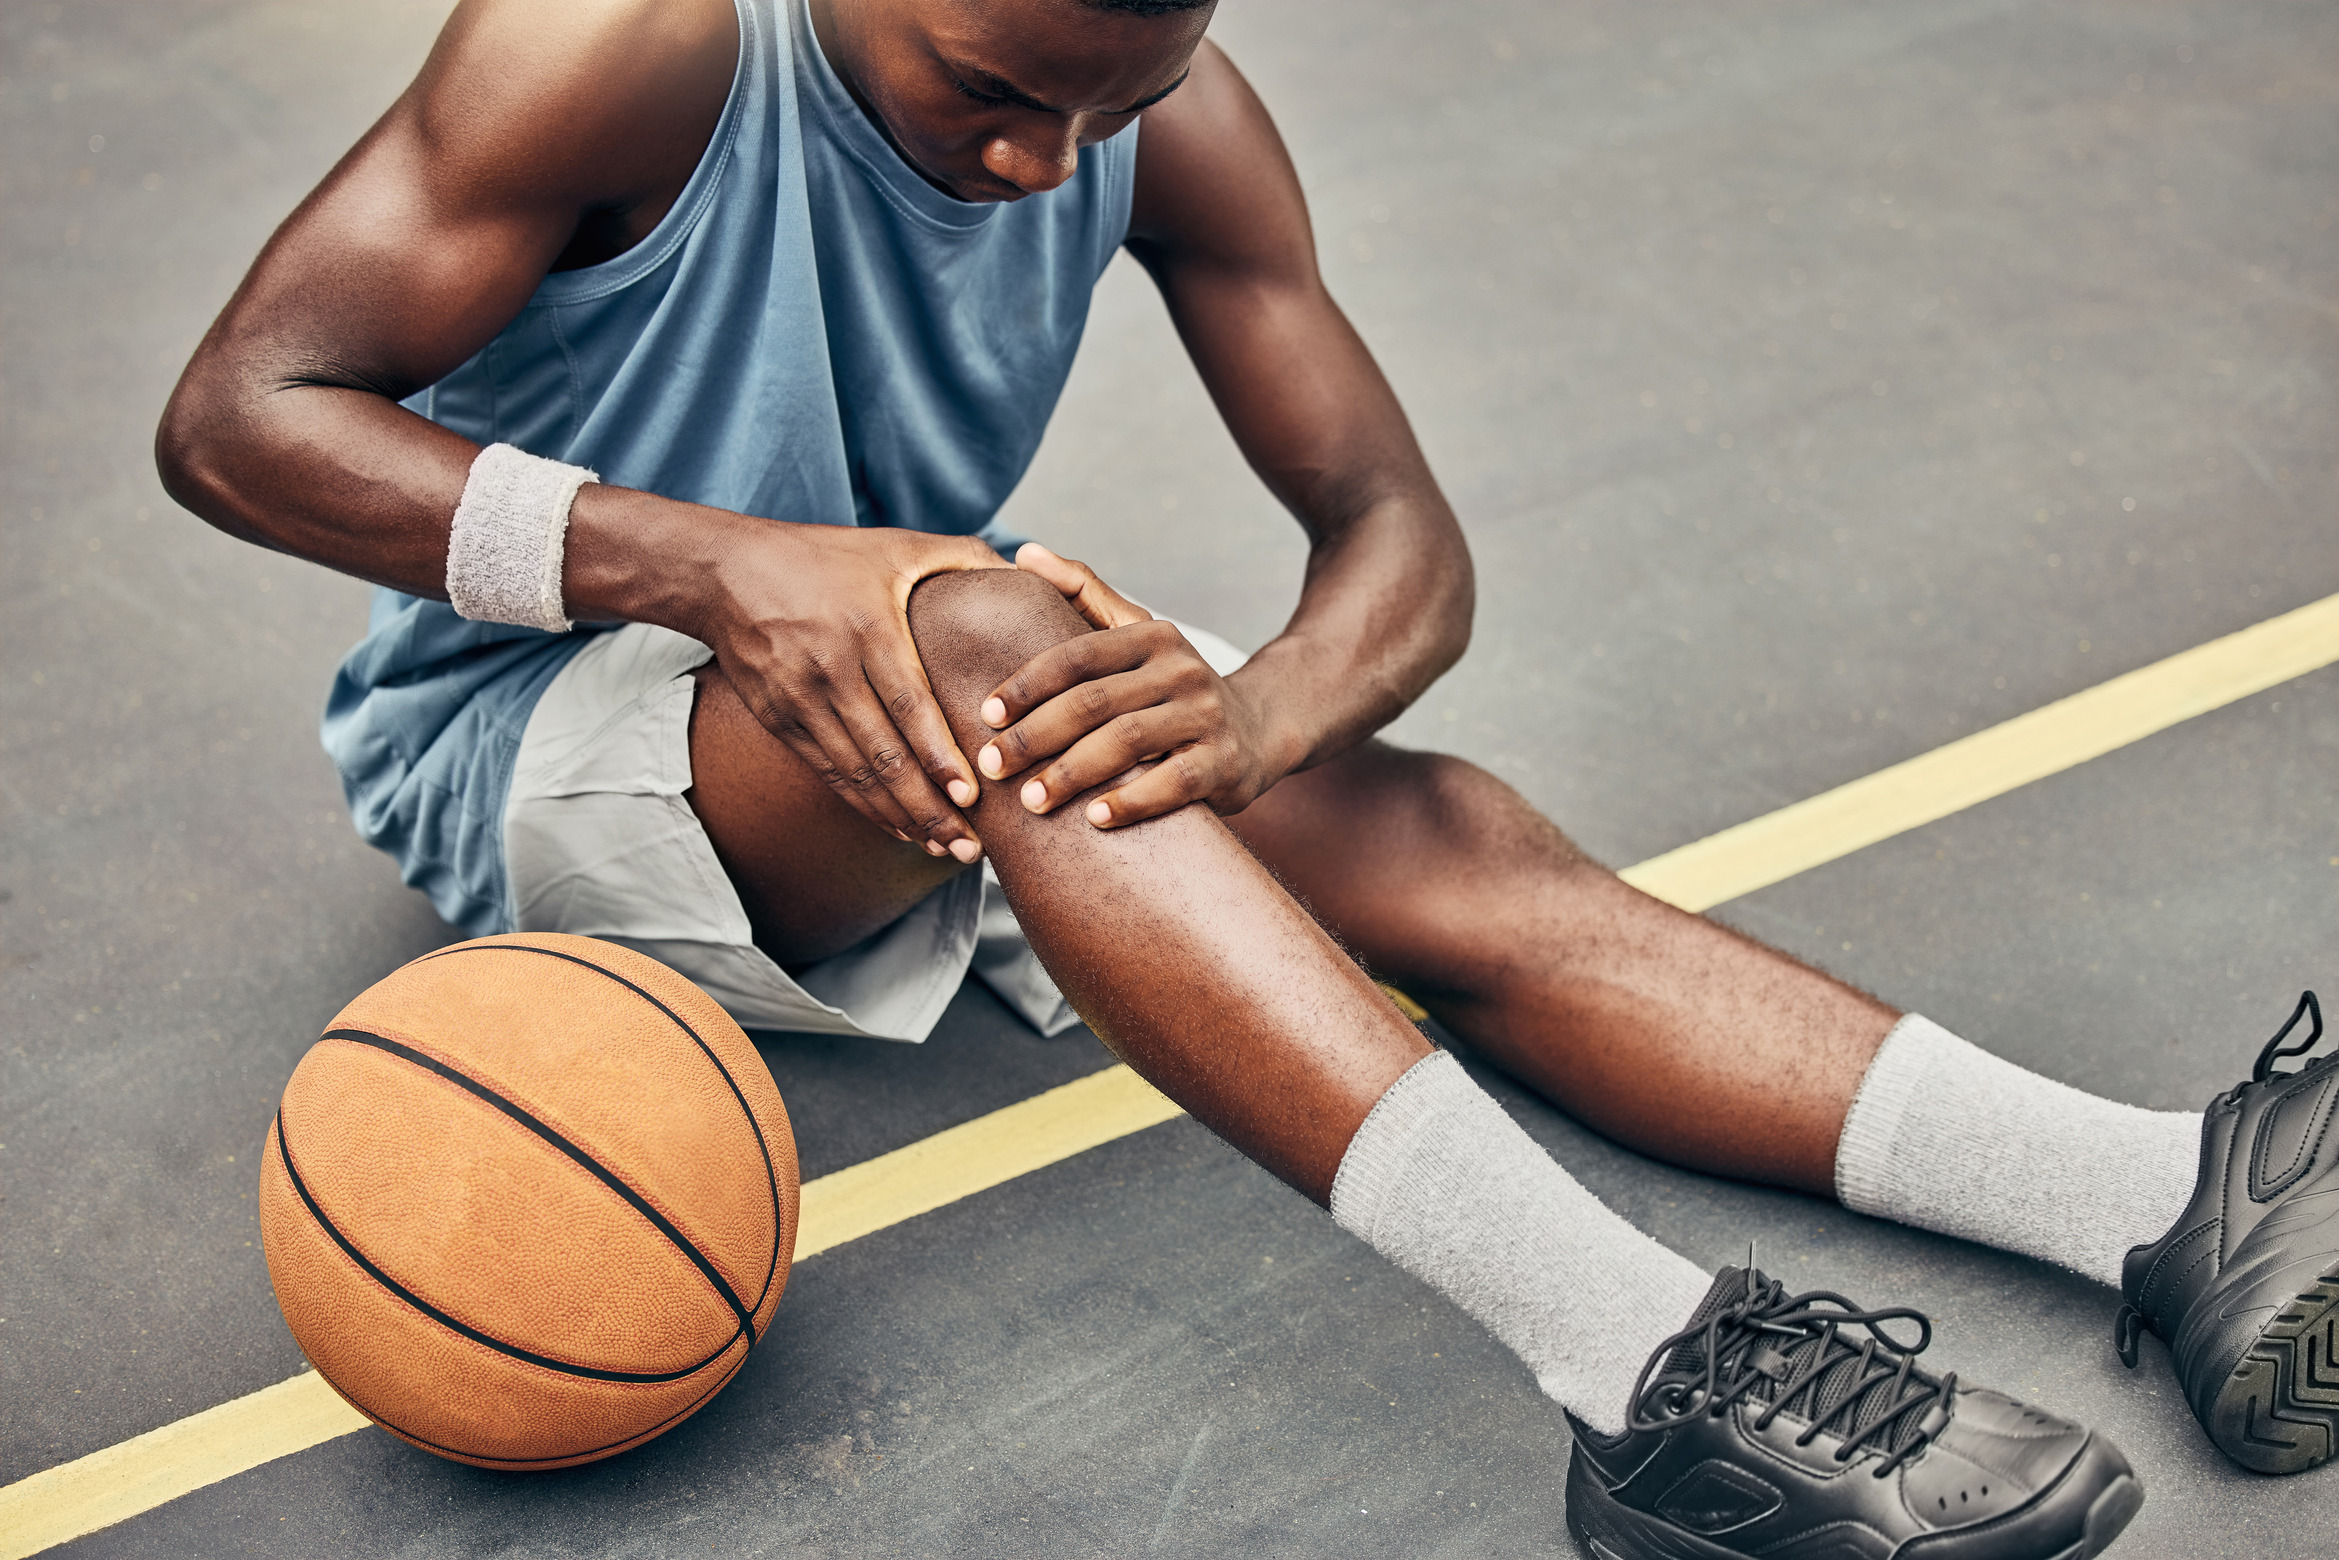 Latest Research on ACL Injuries and Rehab Outcomes